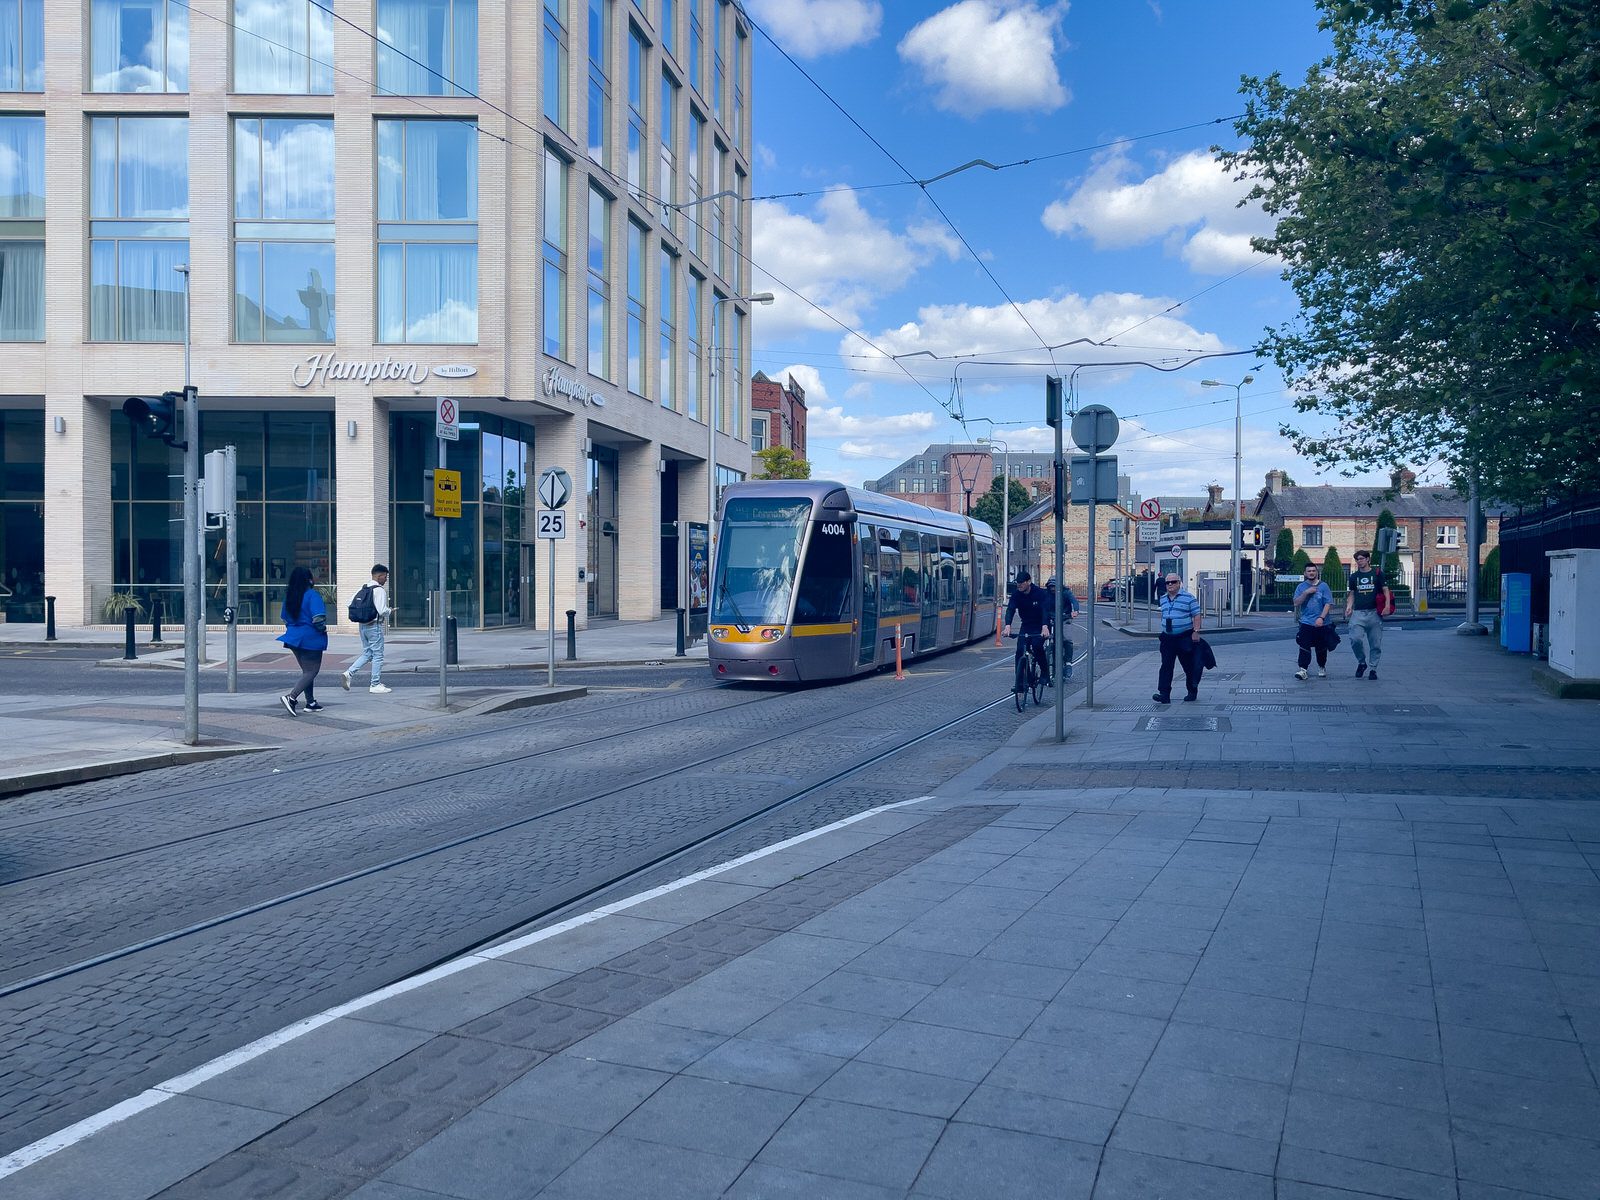 THE LUAS FOUR COURTS TRAM STOP [THERE IS MUCH TO BE SEEN HERE]-234113-1